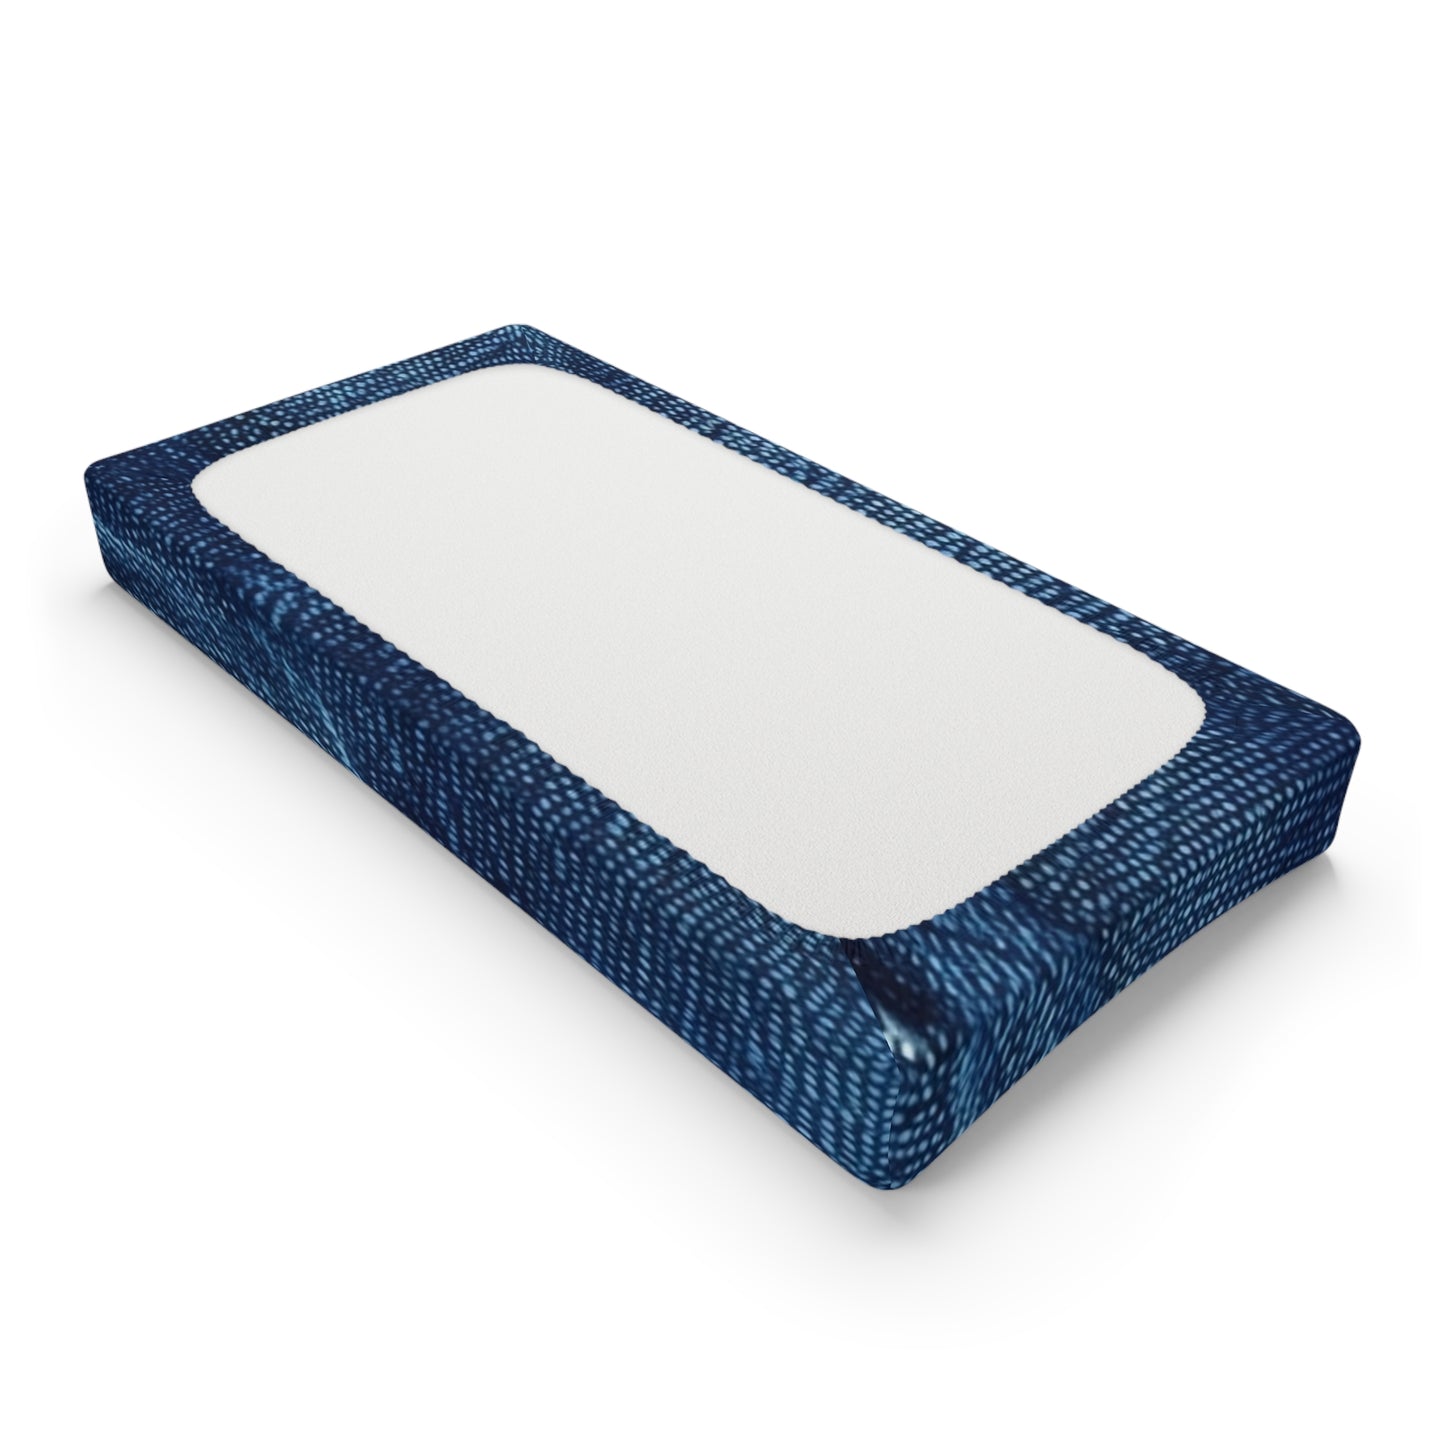 Dark Blue: Distressed Denim-Inspired Fabric Design - Baby Changing Pad Cover